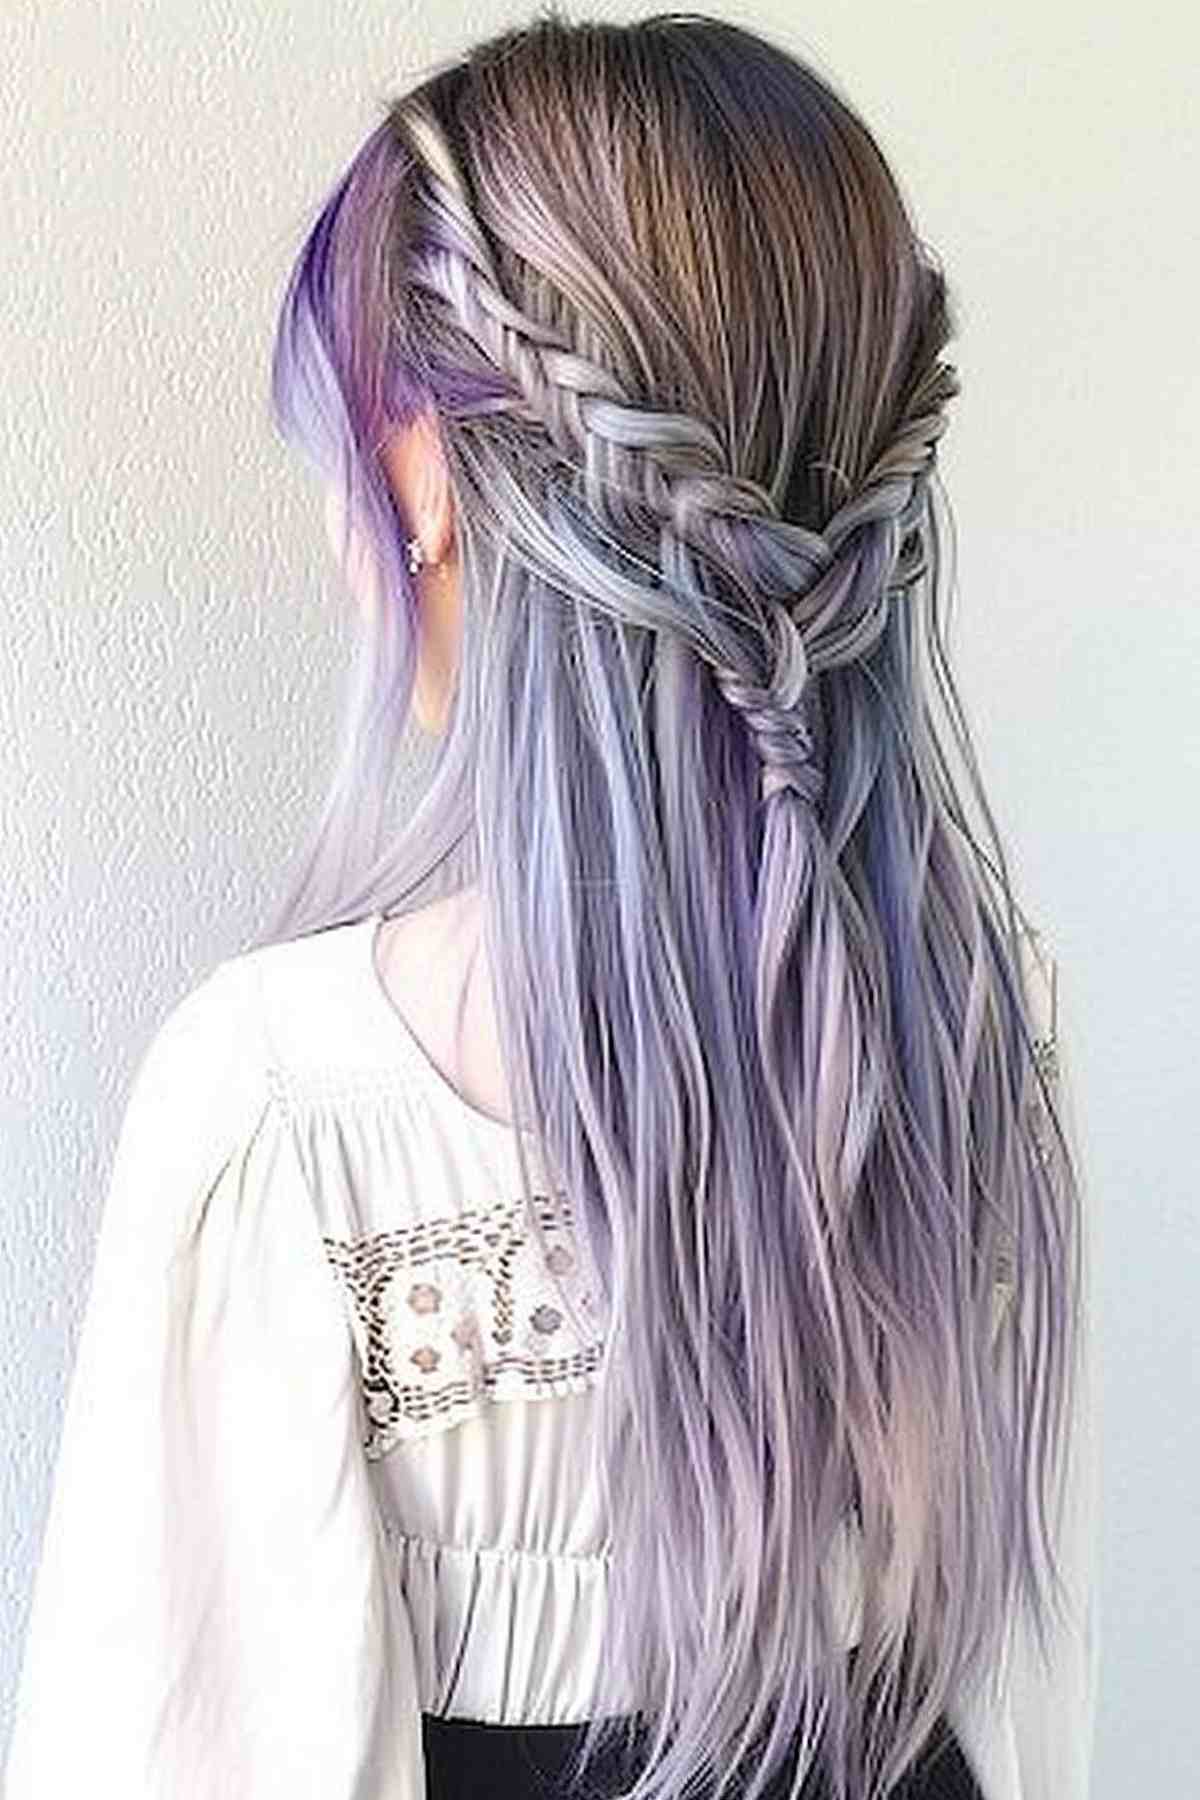 Long braided hair blending cool silver into vibrant purple tones